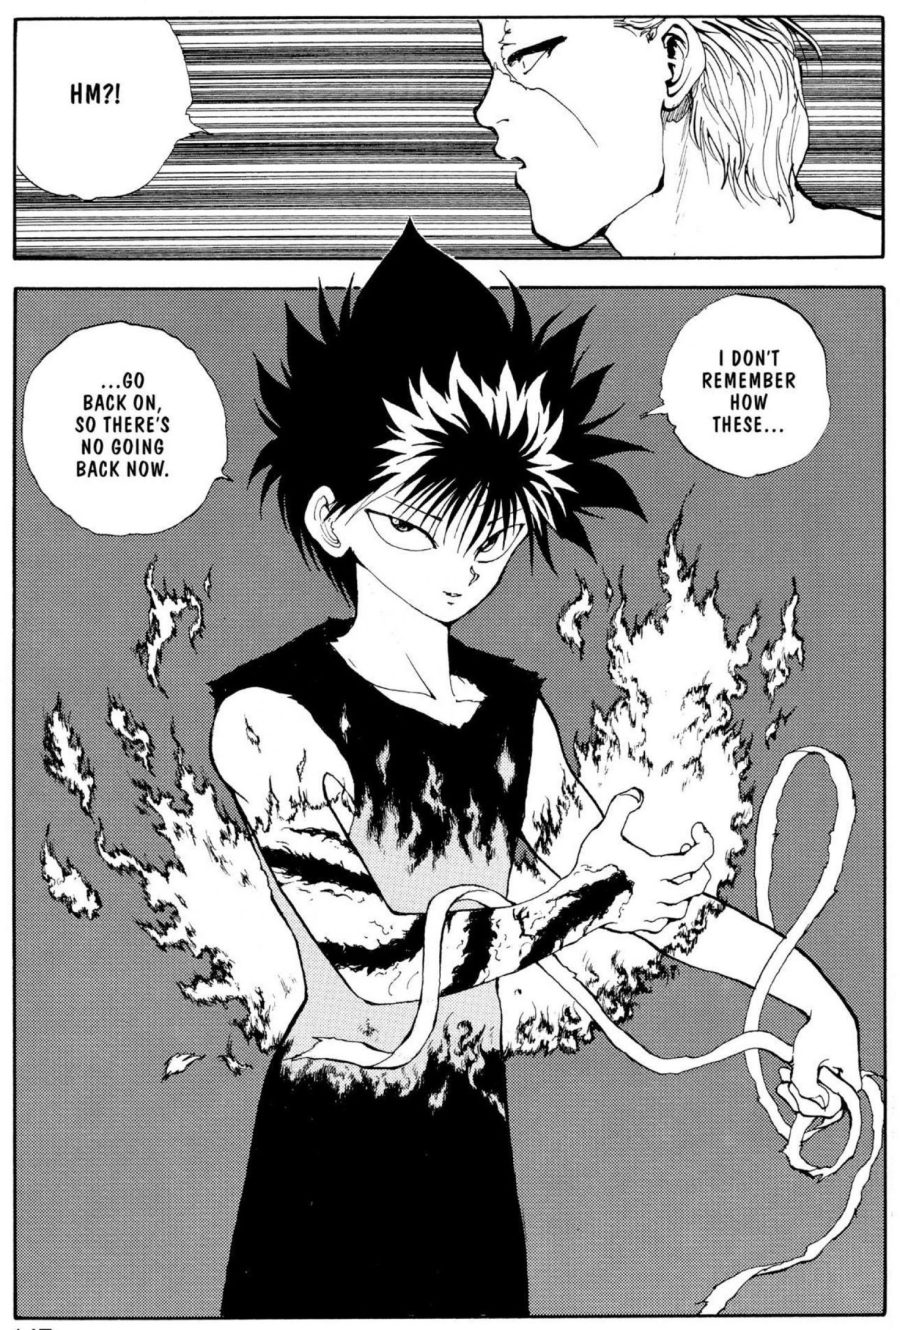 Hiei unveils his Dragon of the Darkness Flame in Yu Yu Hakusho Ch. 99 "Eat or Be Eaten!!" (1992), Shueisha. Words and art by Yoshihiro Togashi.